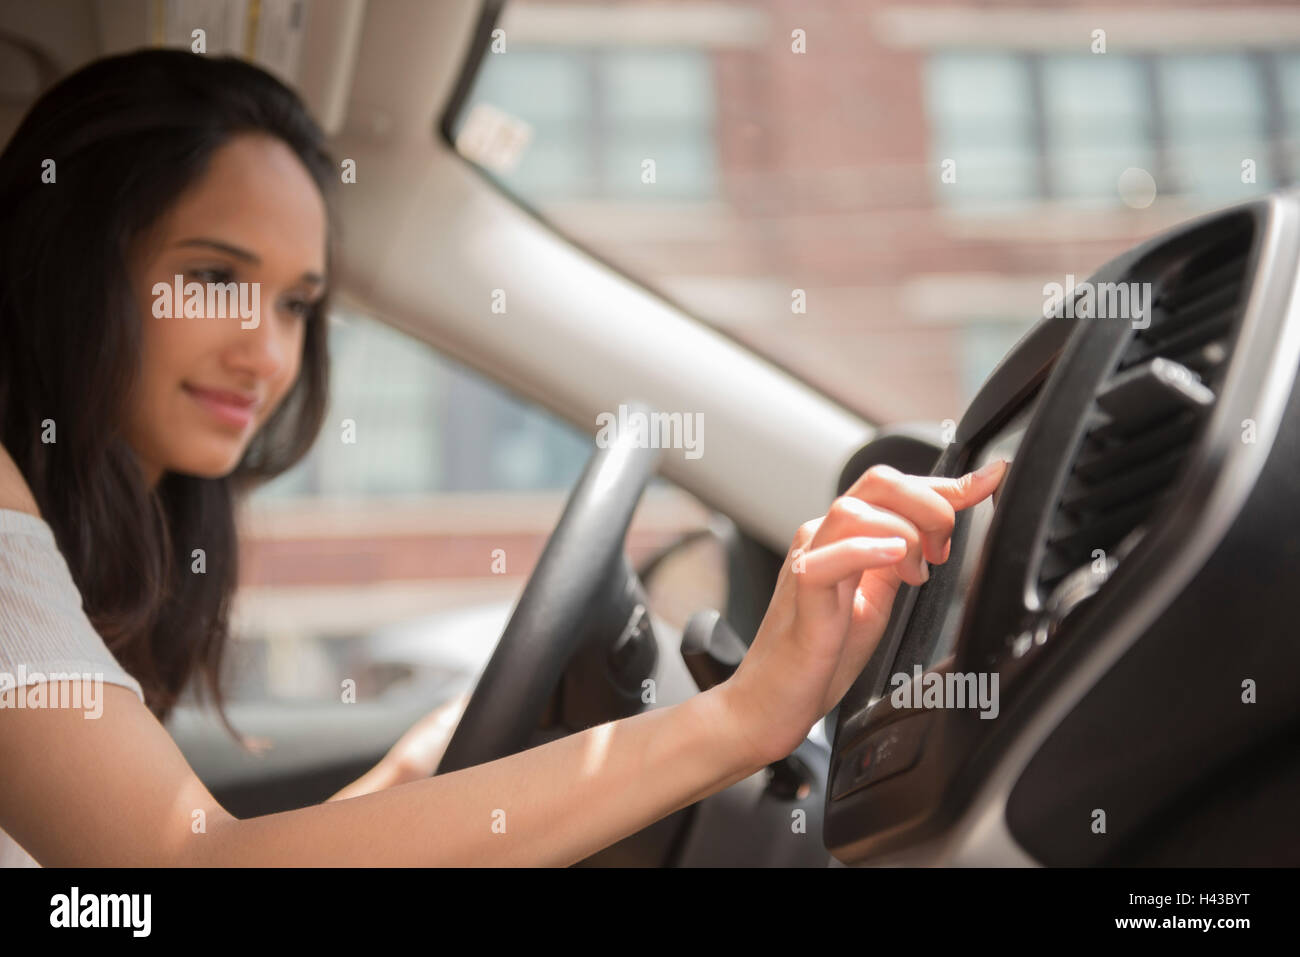 Mixed Race woman pressing touch screen in car Stock Photo